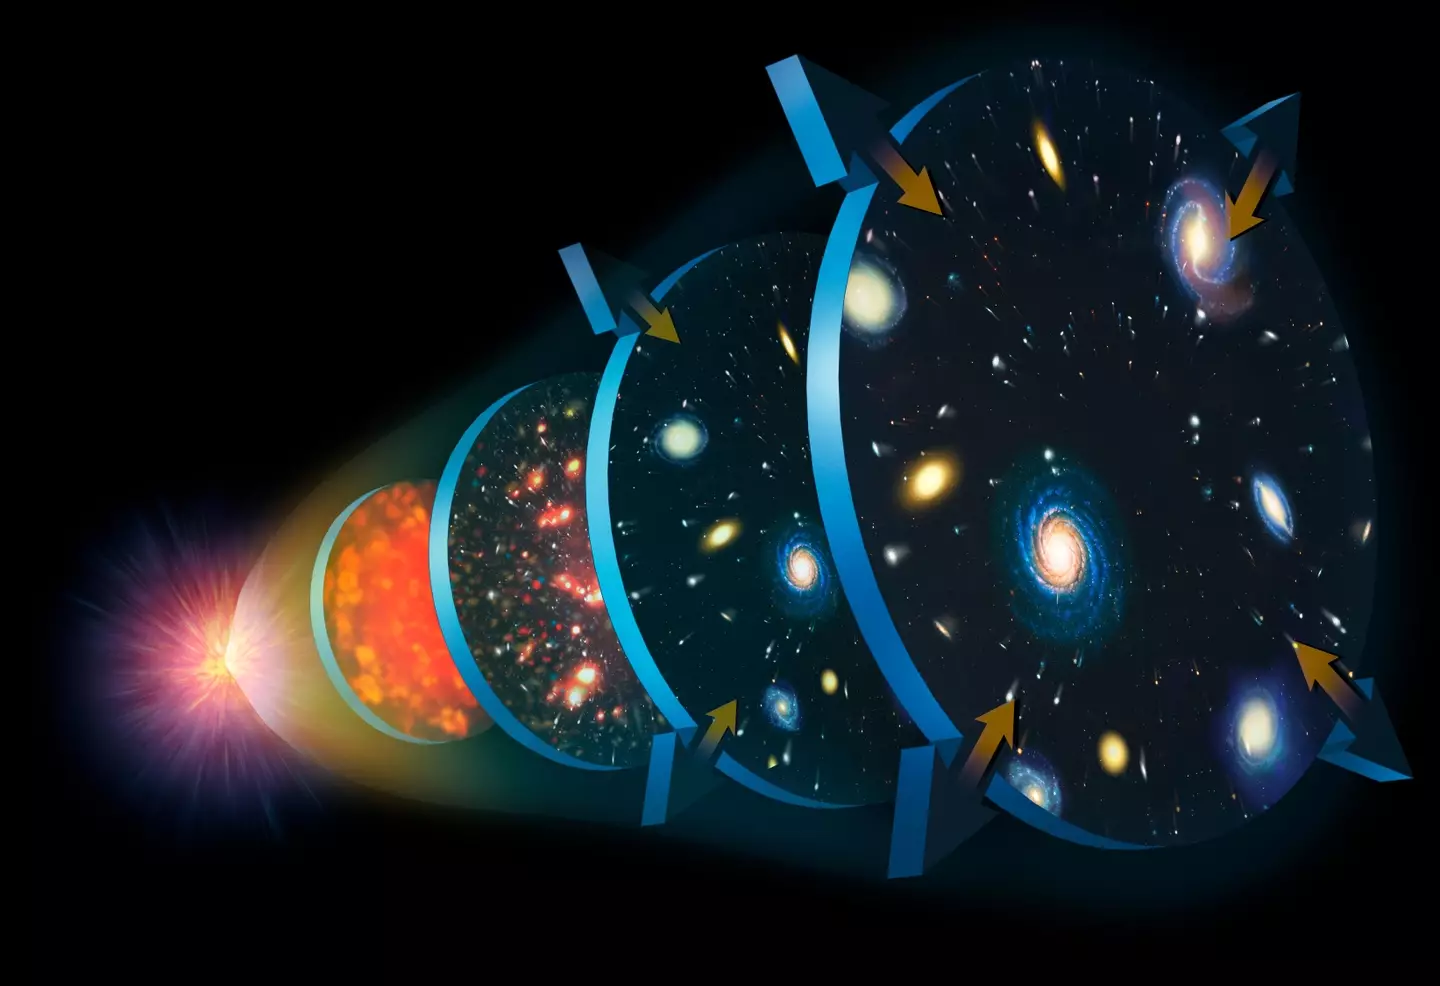 The universe has been expanding since it first began in what is known as the 'Big Bang'.